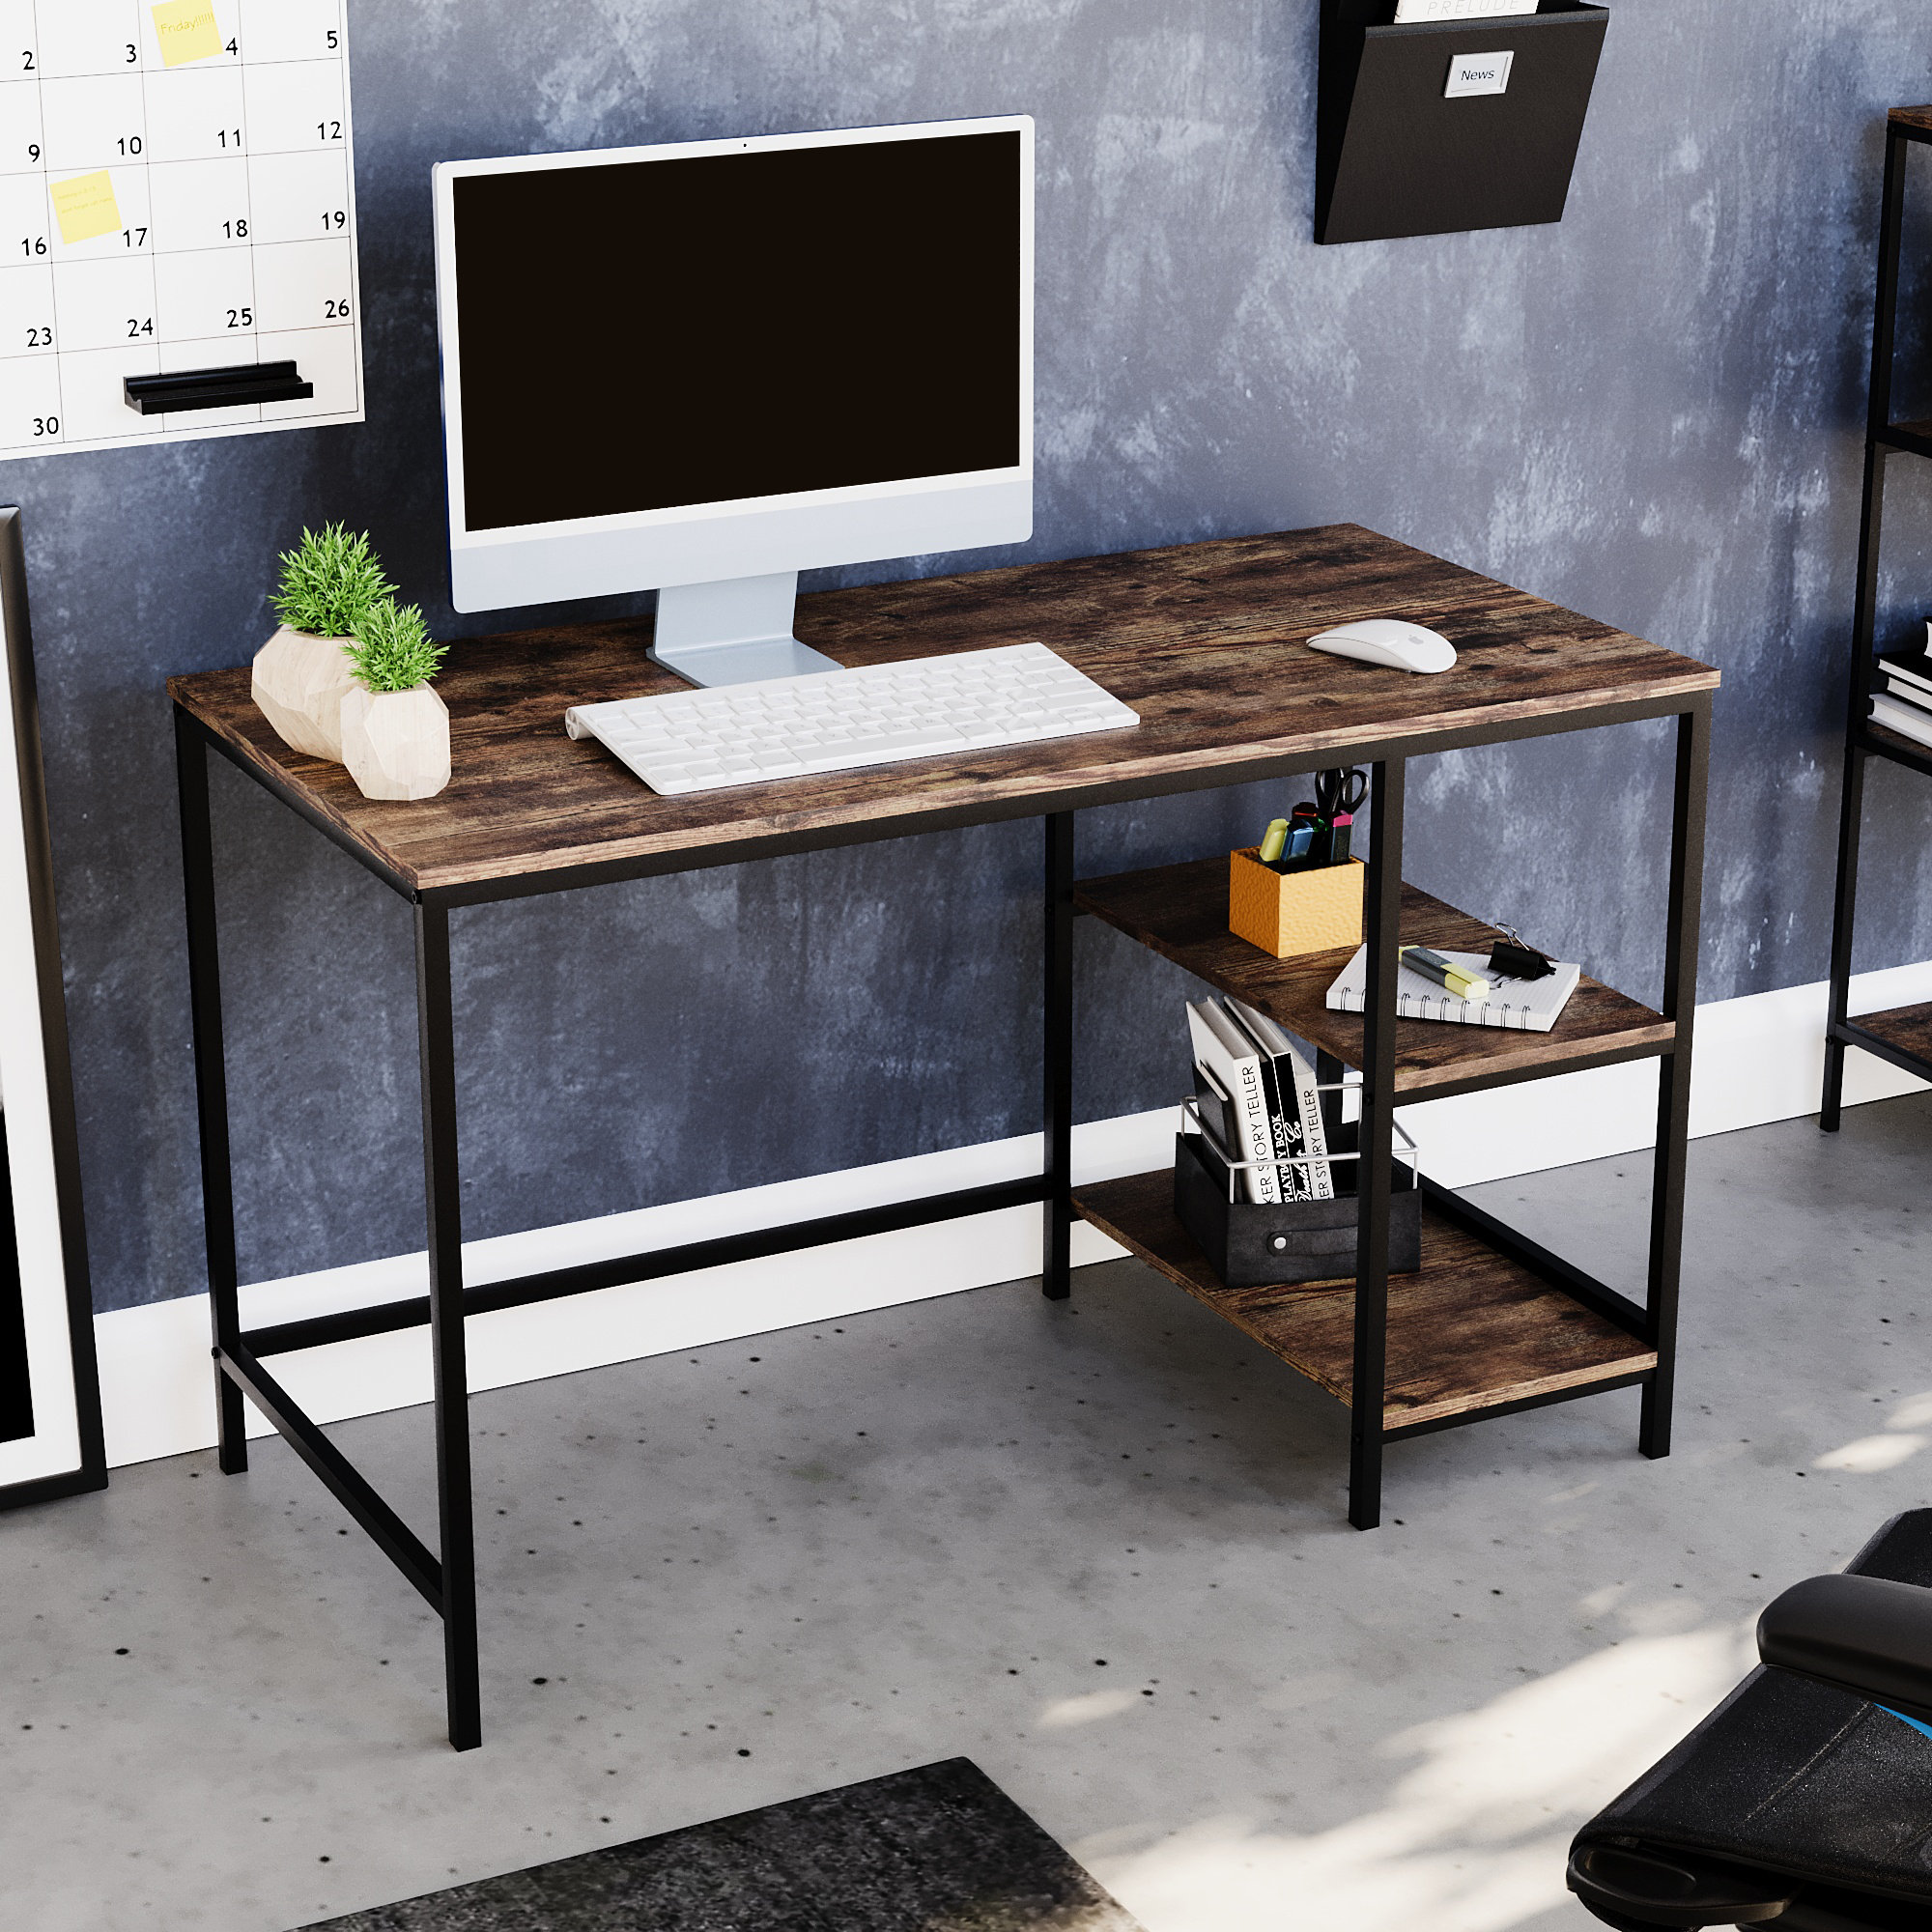 Trent Austin Lilith Industrial Style Computer Desk With Storage Shelves and  Metal Legs Home Office Workstation & Reviews 